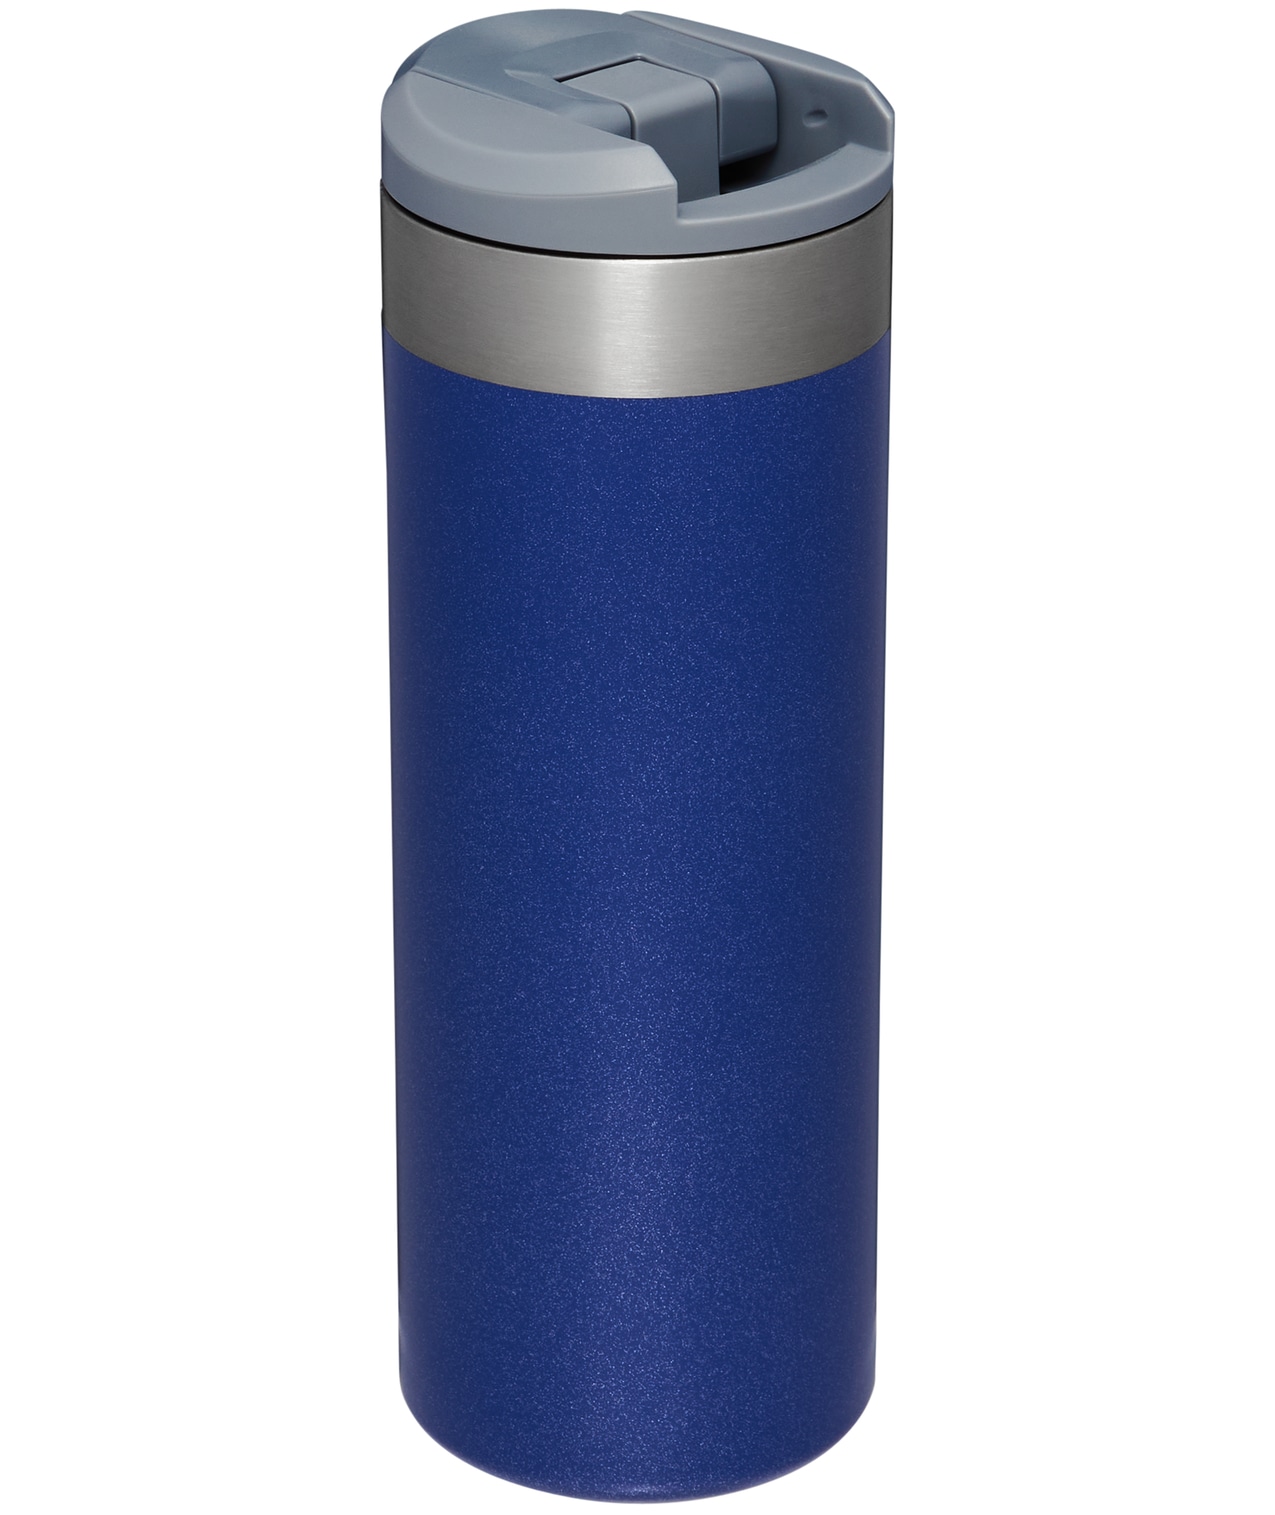 Thermos 16 oz. Insulated Double Wall Travel Tumbler with Lid - Stripes